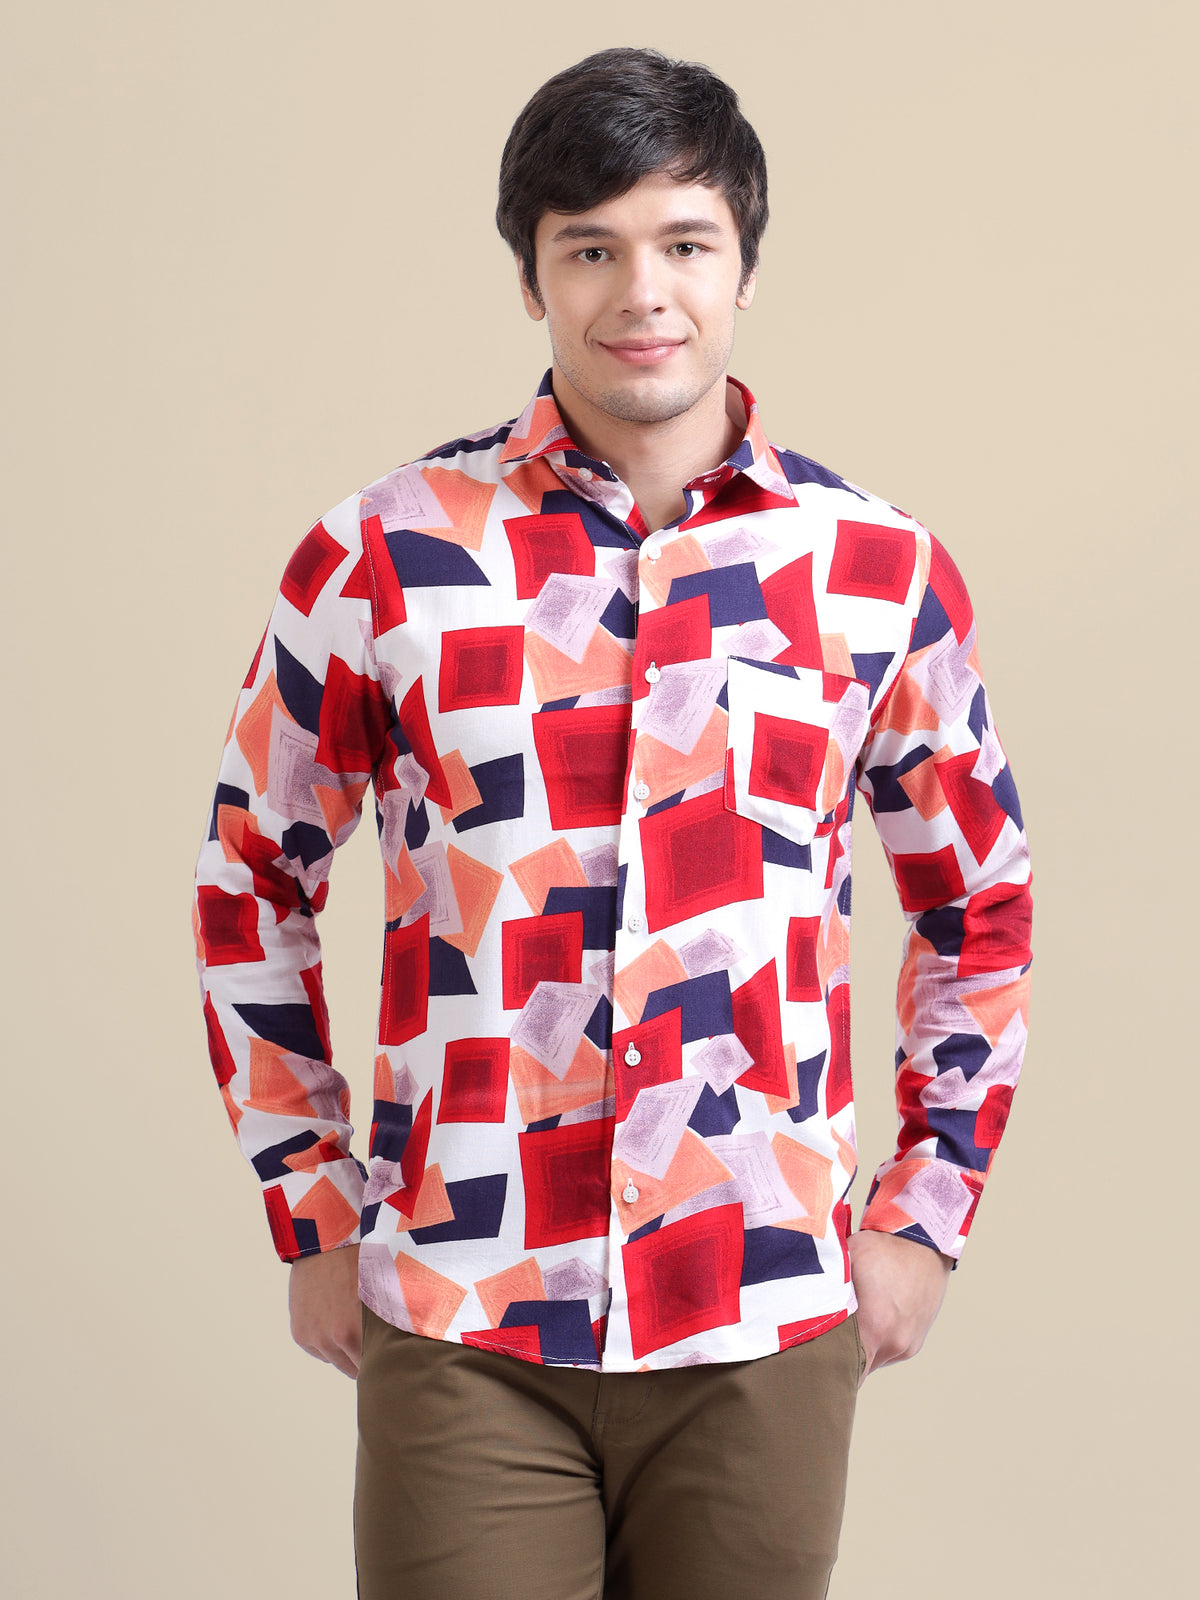 AMSWAN MEN'S PREMIUM RAYON SHIRT WITH RED AND BLUE PRINT